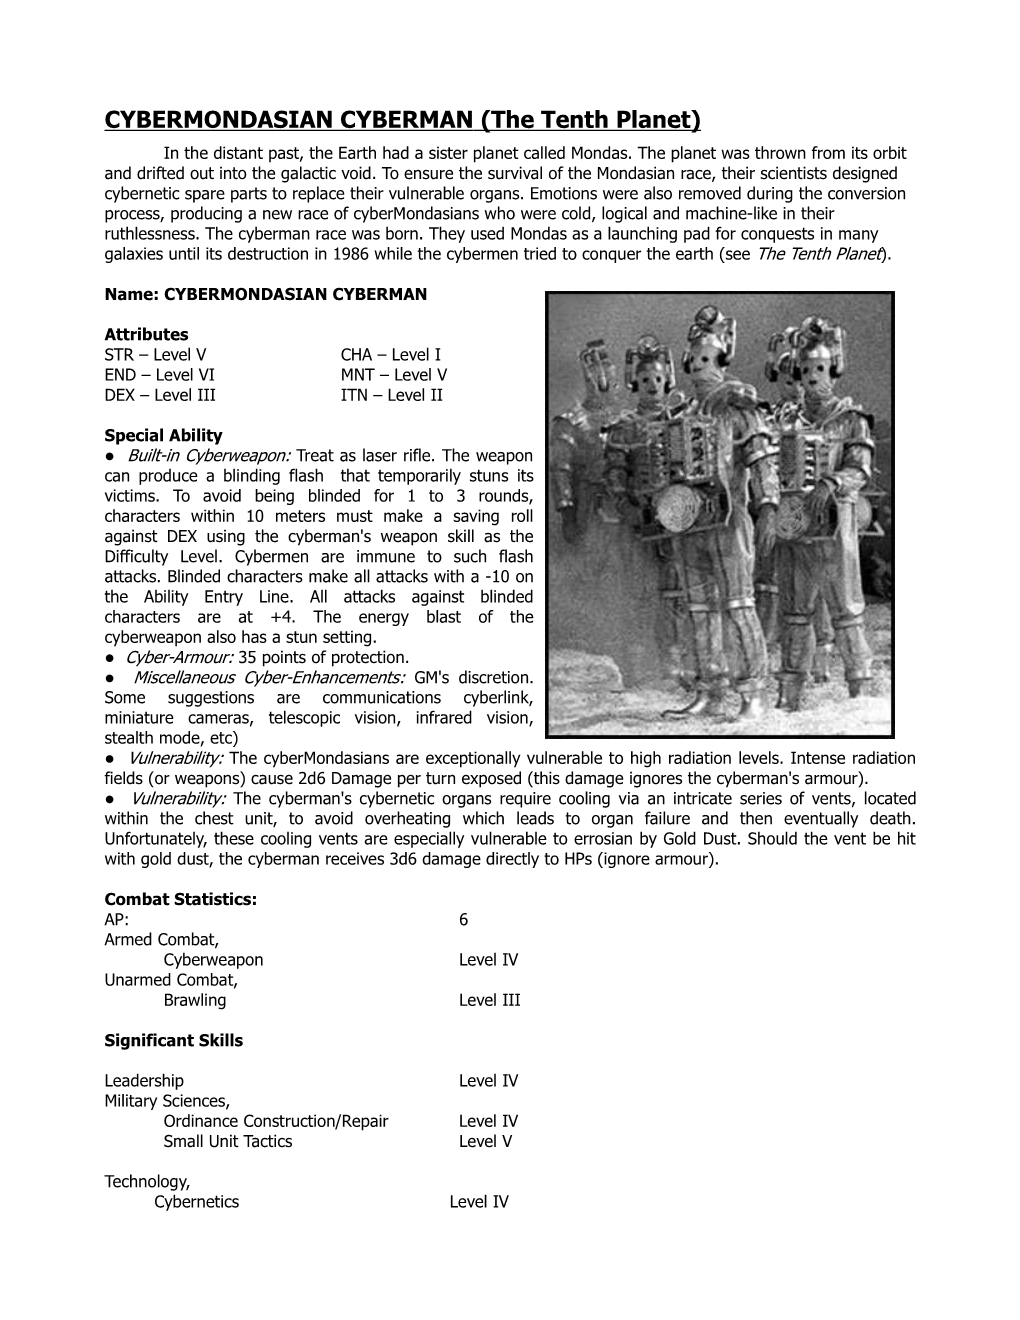 CYBERMONDASIAN CYBERMAN (The Tenth Planet) in the Distant Past, the Earth Had a Sister Planet Called Mondas